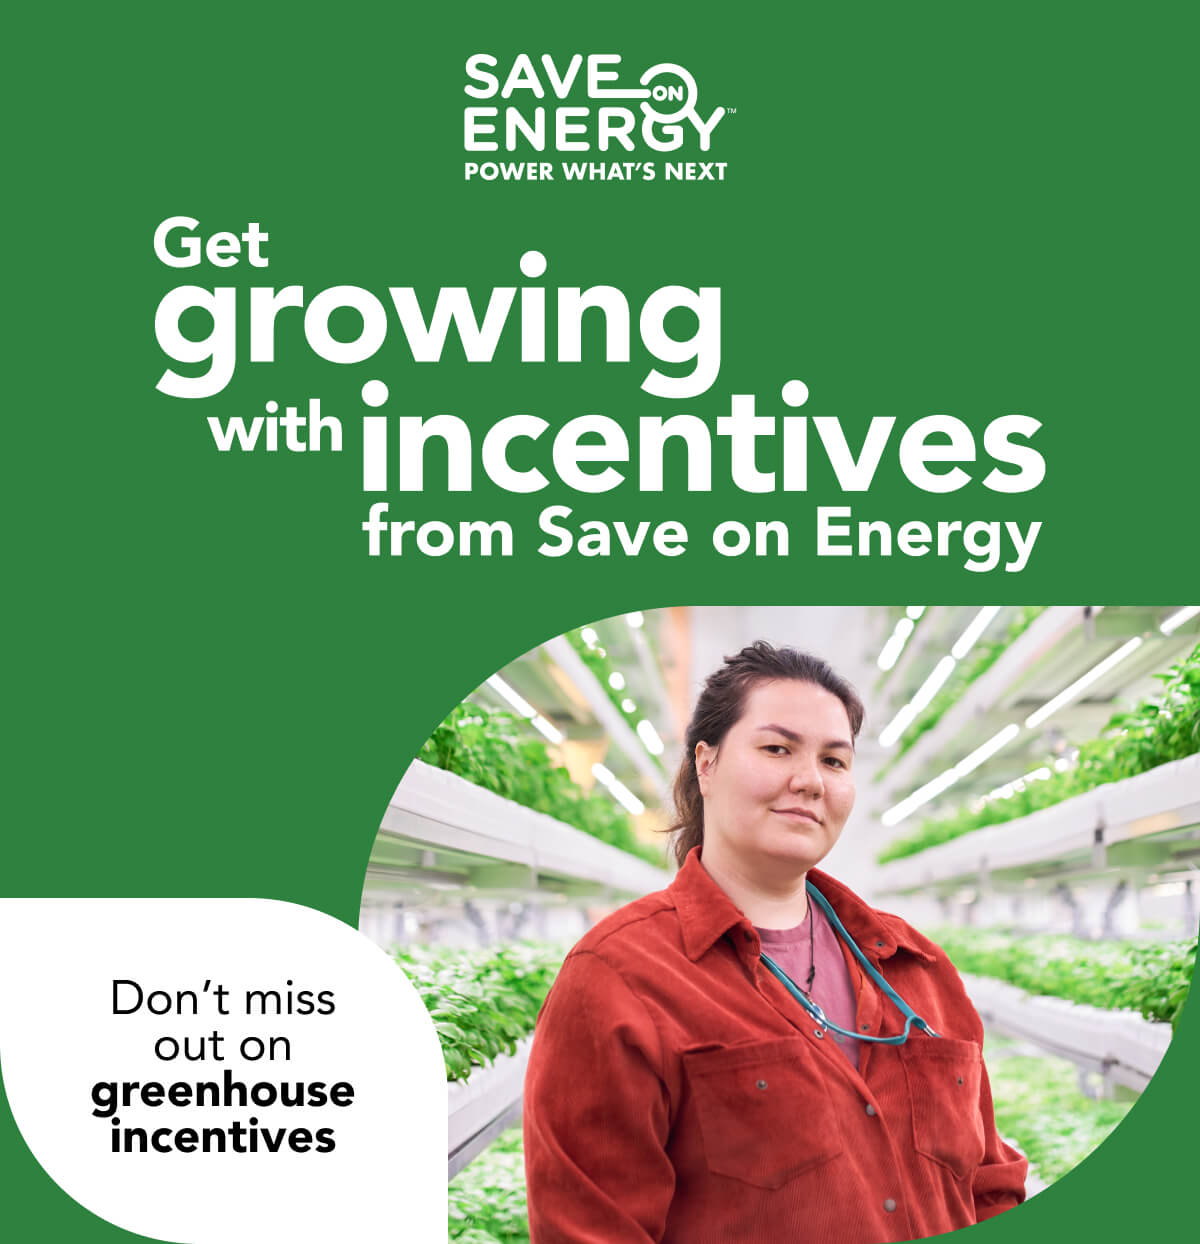 Save on Energy, power what’s next. Get growing with incentives from Save on Energy. Don’t miss out on greenhouse incentives: Image of a greenhouse labourer standing in the aisle of a well-lit plant nursery. The aisle is lined by large rows of healthy greenery, extending far into the distance.